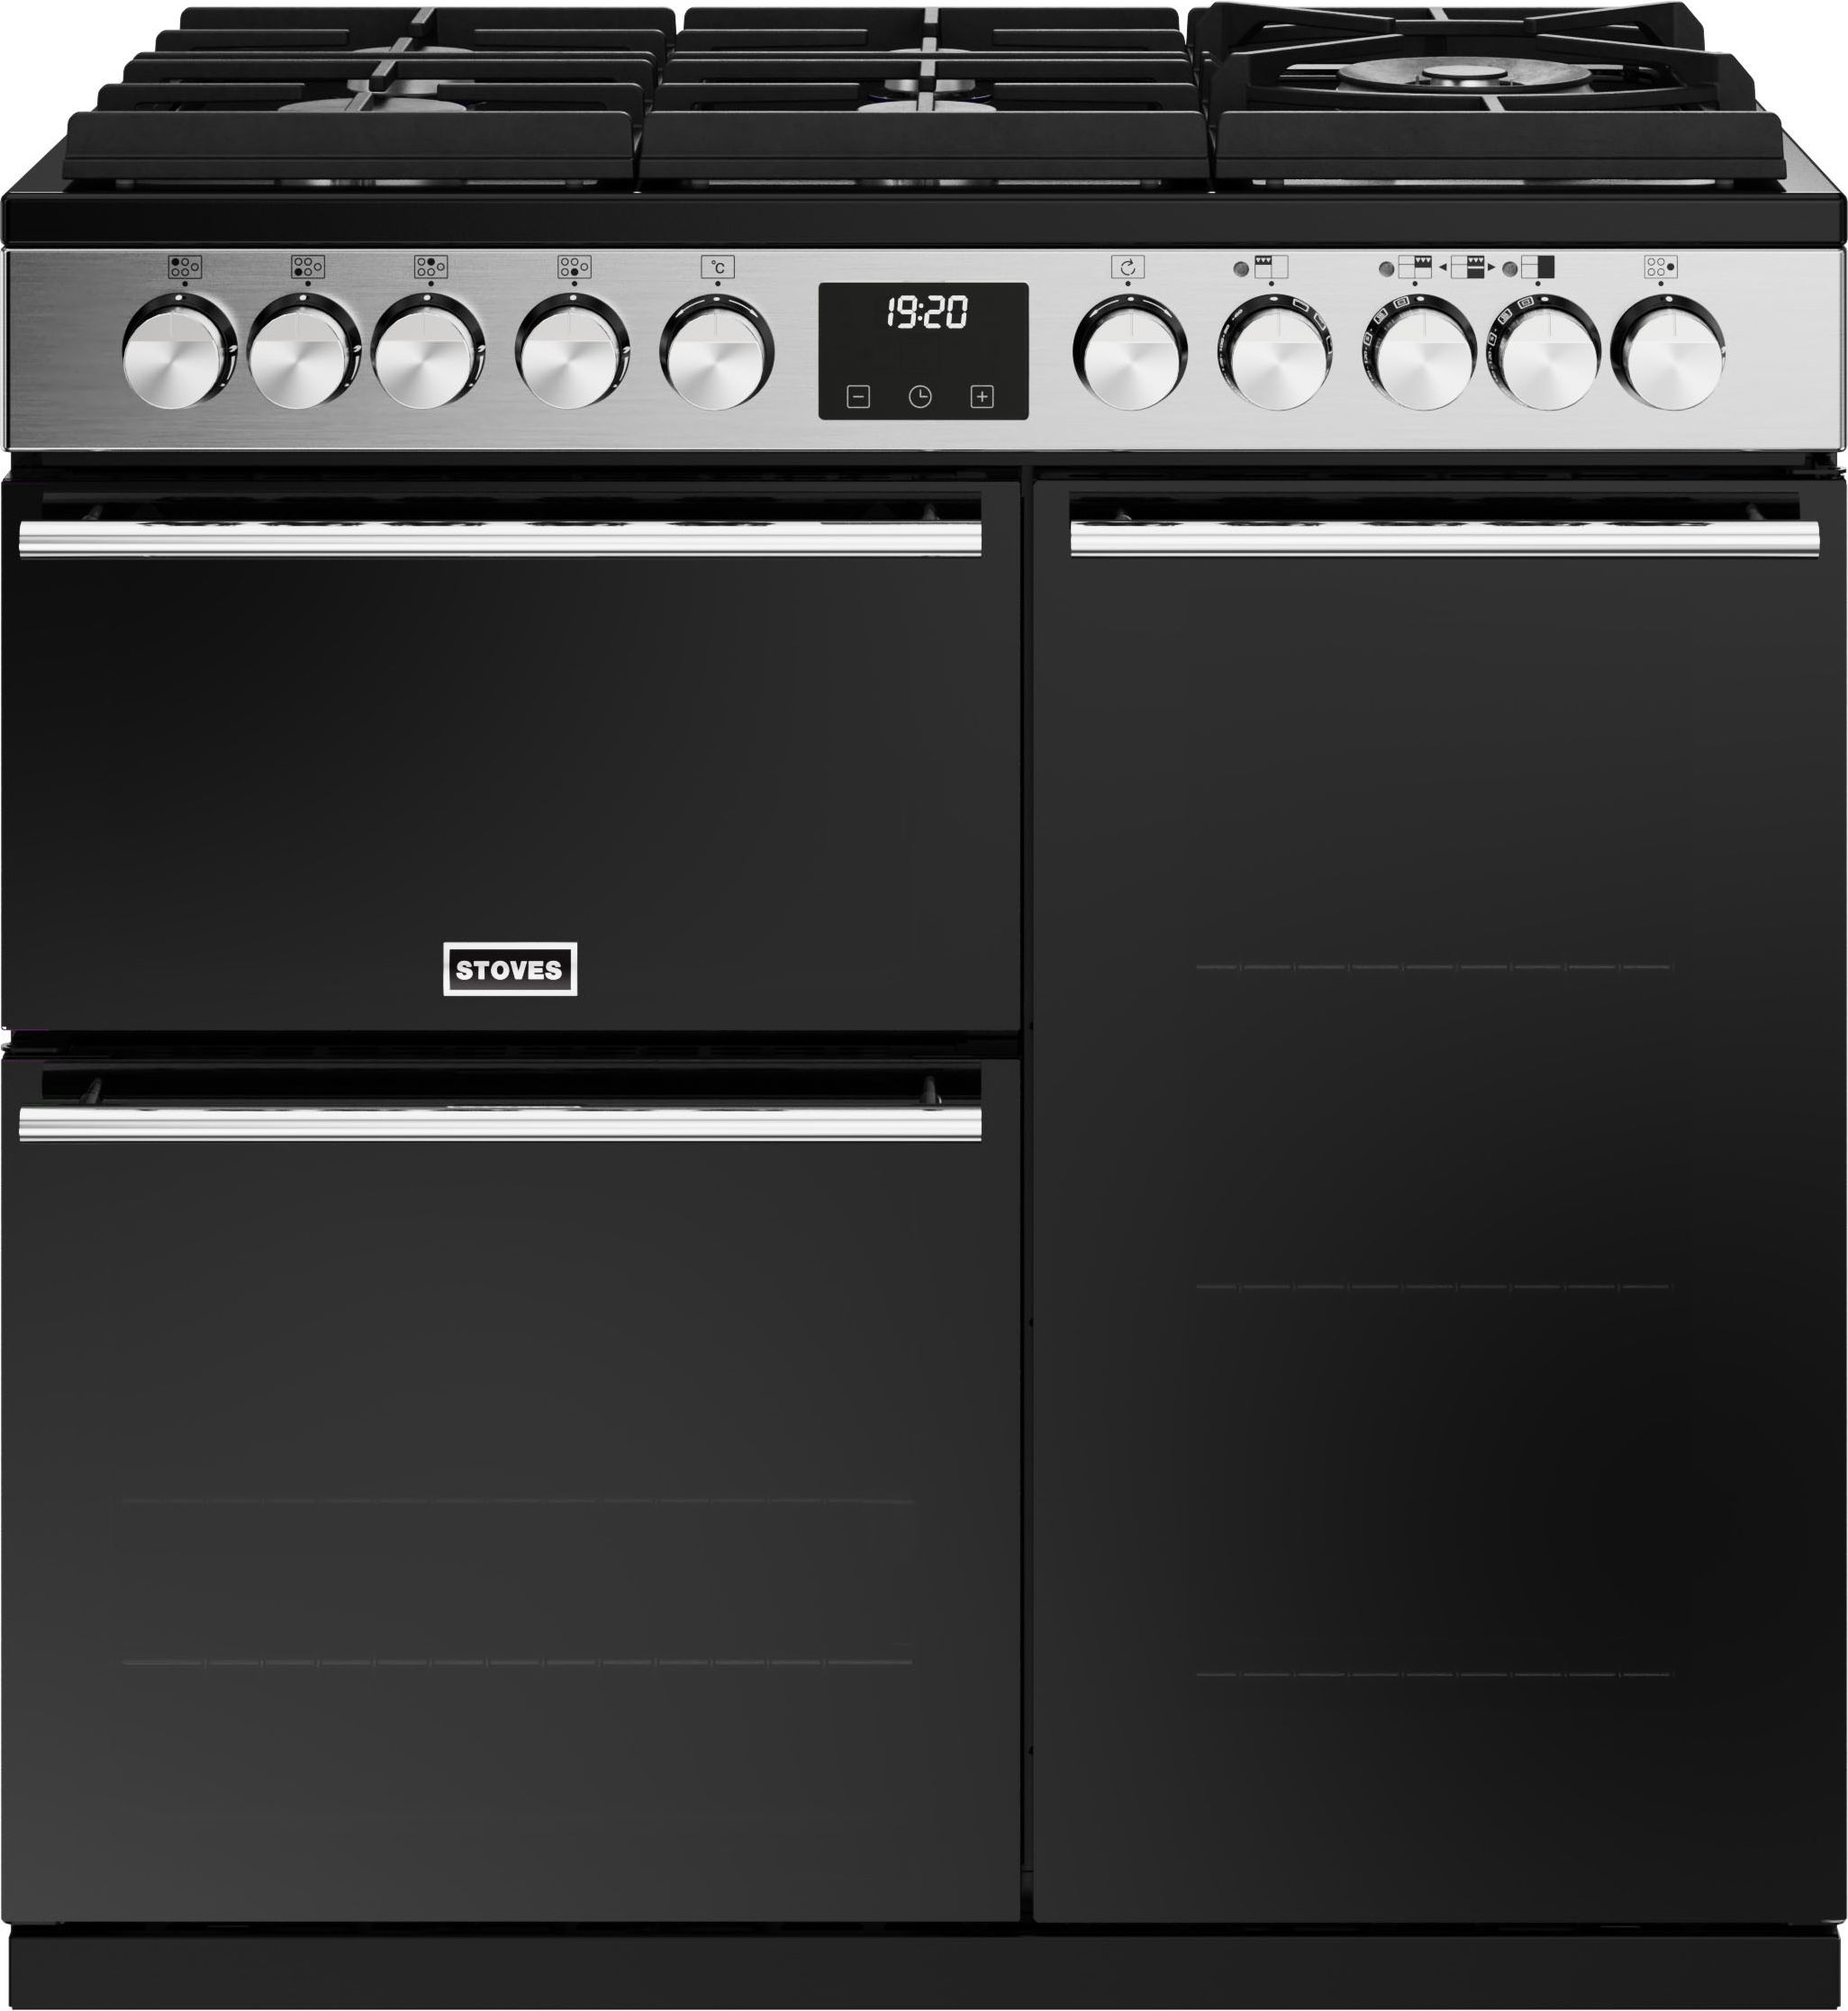 Stoves Precision Deluxe ST DX PREC D900DF GTG SS Dual Fuel Range Cooker - Stainless Steel / Black - A/A/A Rated, Stainless Steel